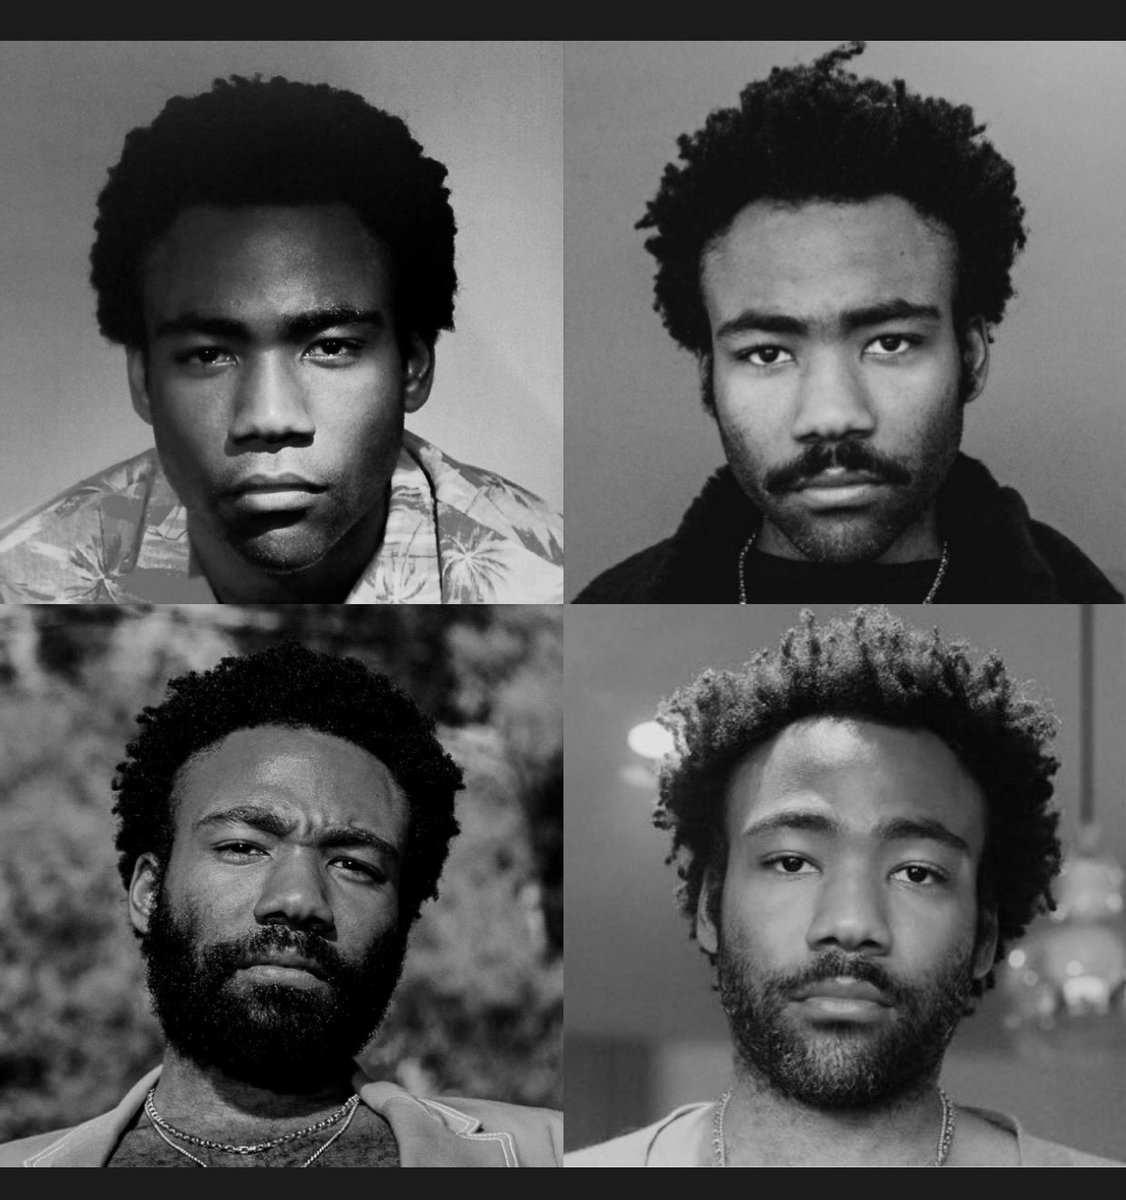 Donald Glover is one of the greatest artists of this generation 

PERIOD

Don’t even @ me 

#ChildishGambino #MultiTalented #OneOfTheGreats #GOAT